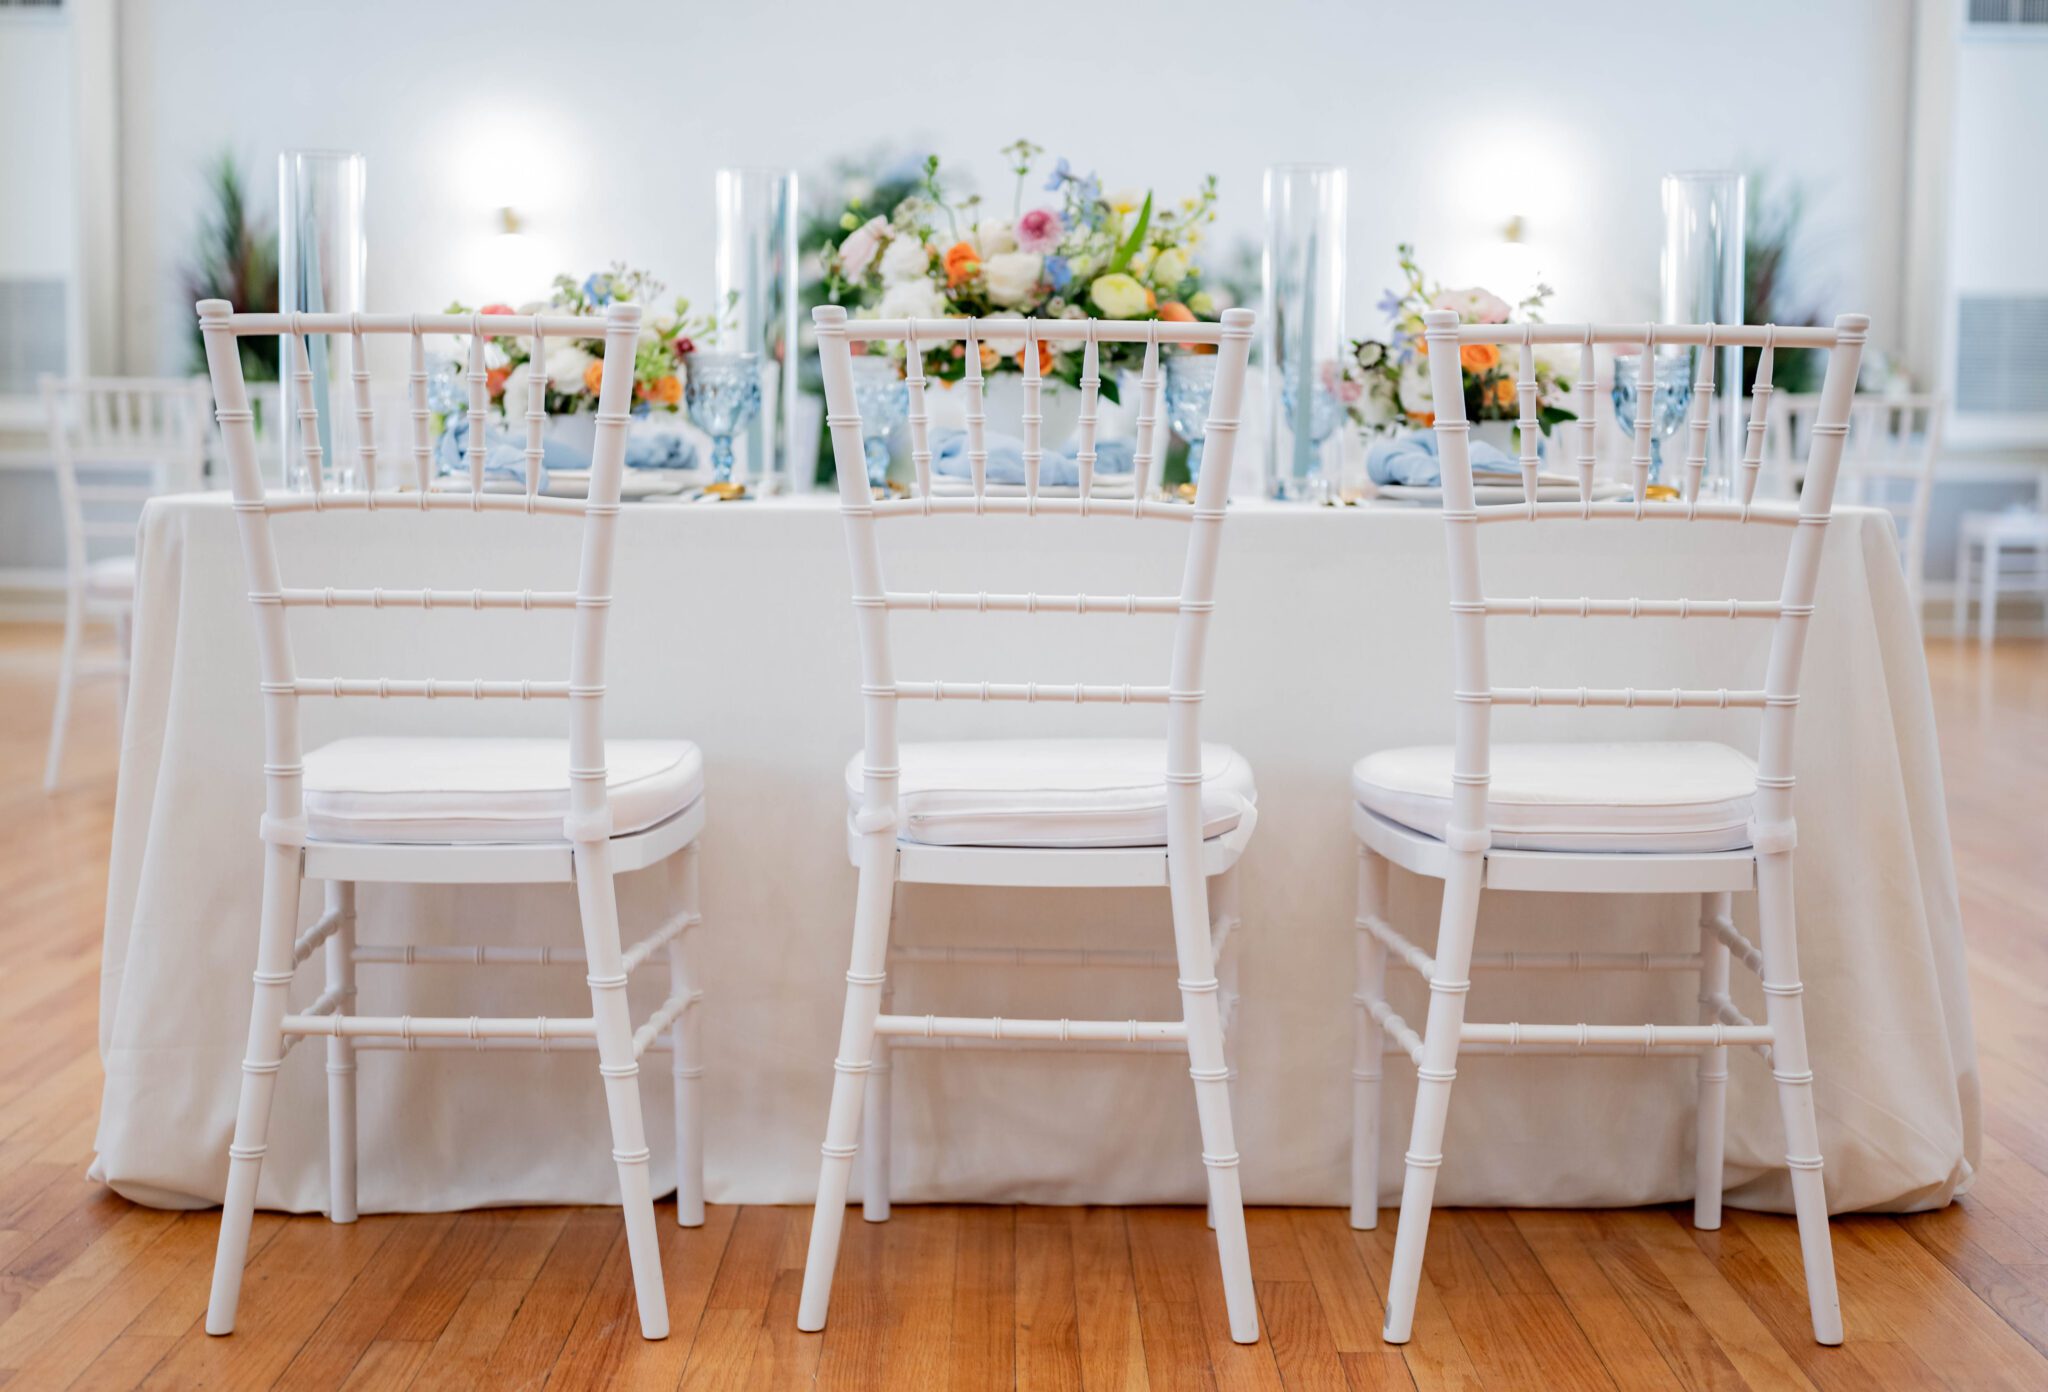 pastel-inspired guest tables with whimsical floral arrangements, white and pastel colour palette with white chiavari guest chairs creating a light and airy atmosphere